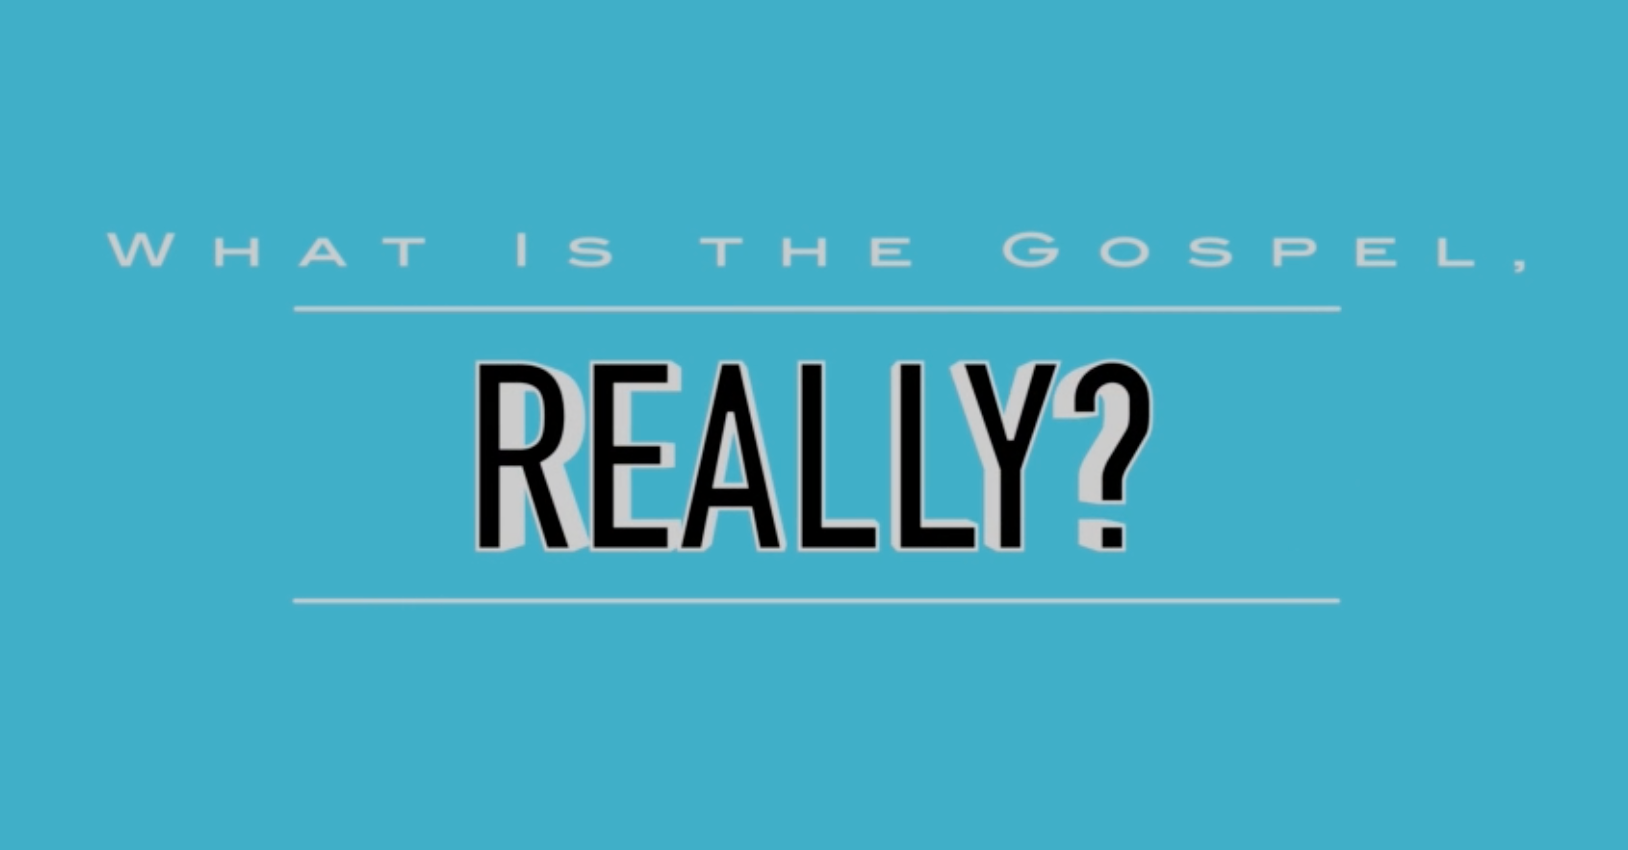 What is the gospel, really?